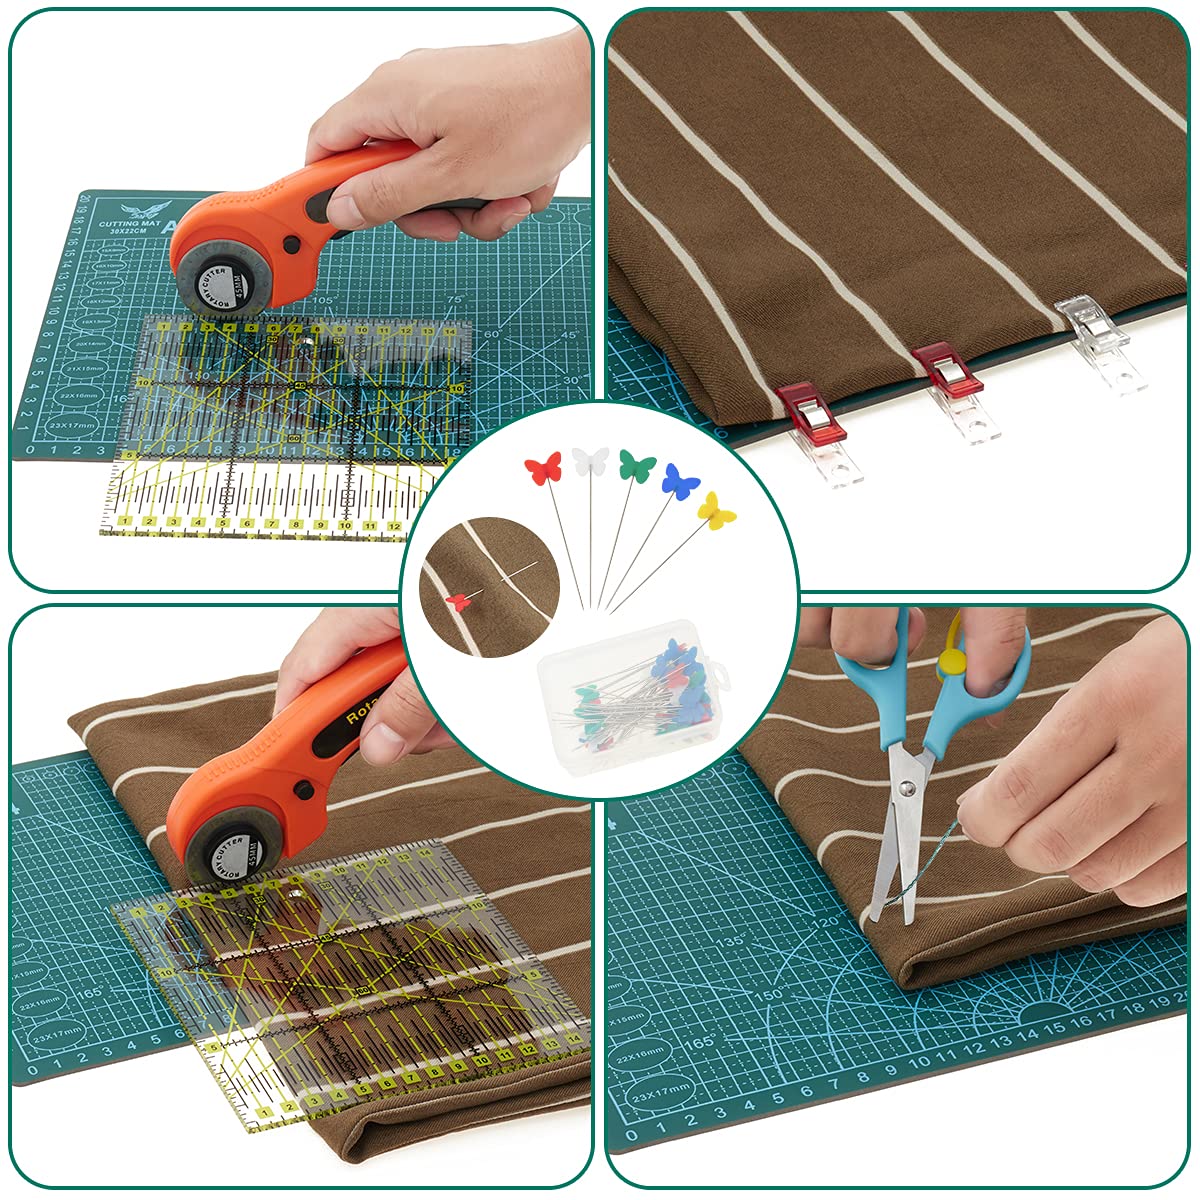 Nicecho Rotary Cutter Set,Sewing Quilting Supplies,45mm Fabric Cutters,A3 Cutting Mat for Sewing,Acrylic Rulers,Scissors,Exacto Knife,Clips